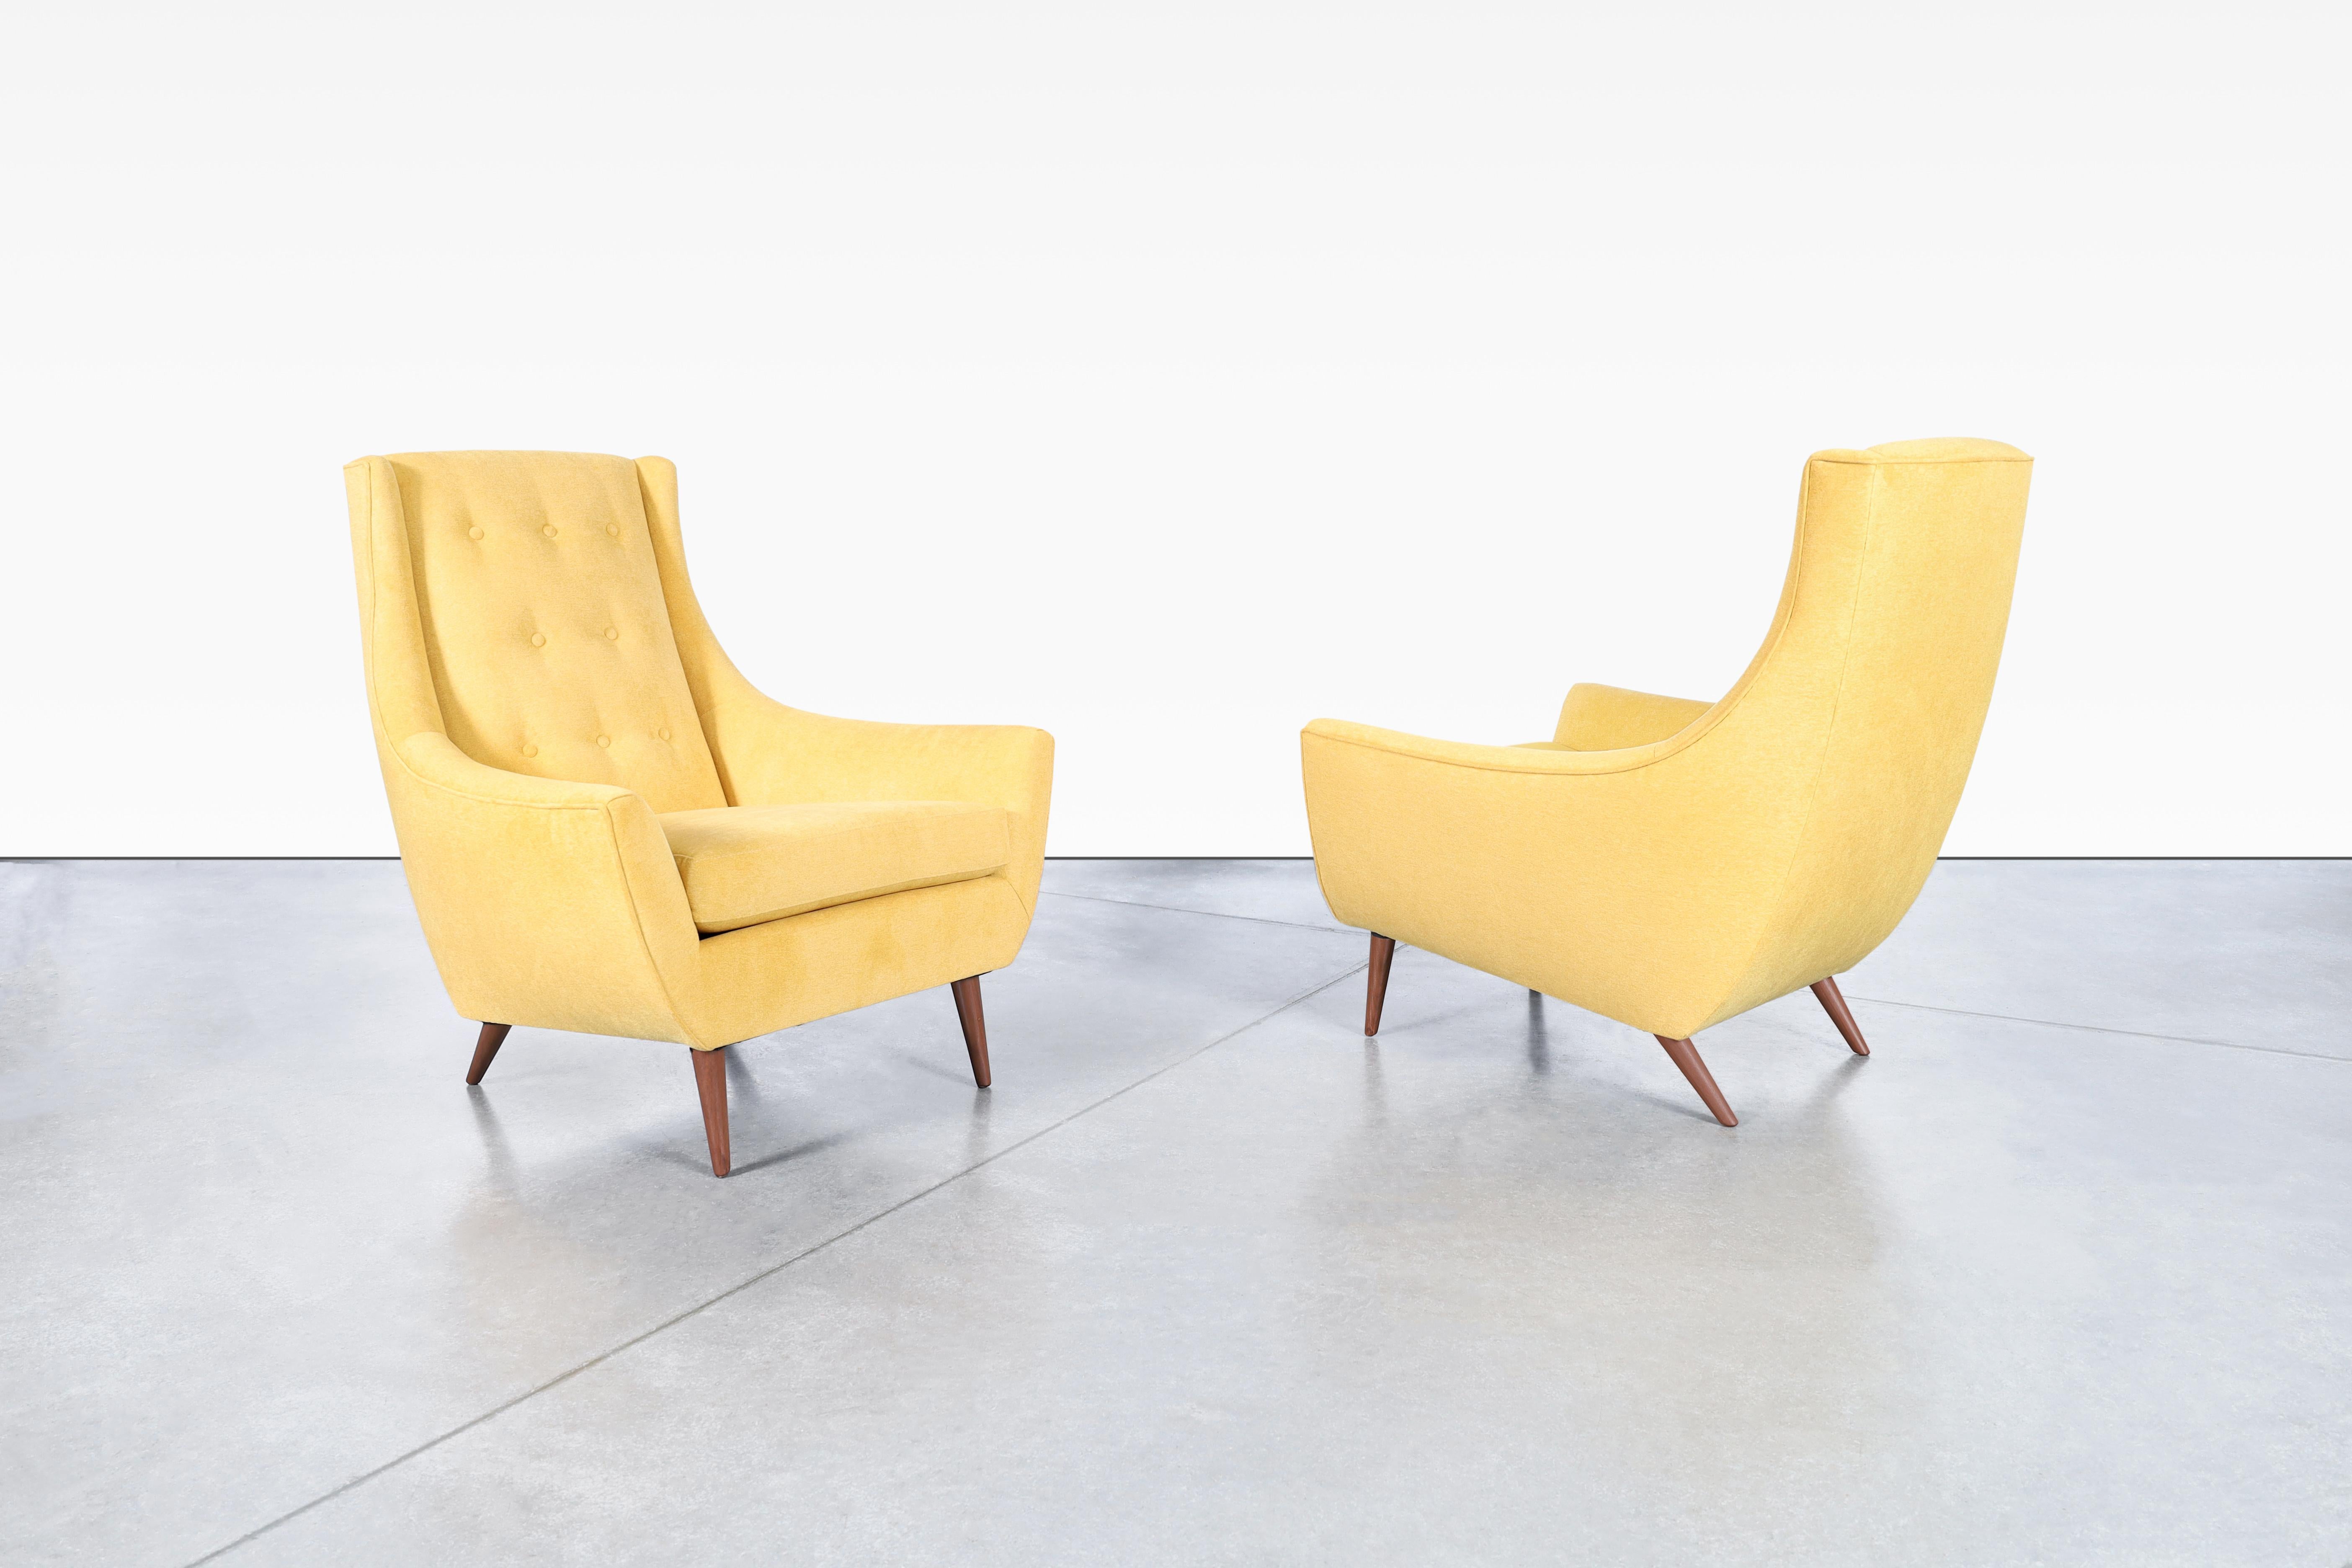 American Mid-Century Modern Walnut High-Back Lounge Chairs For Sale